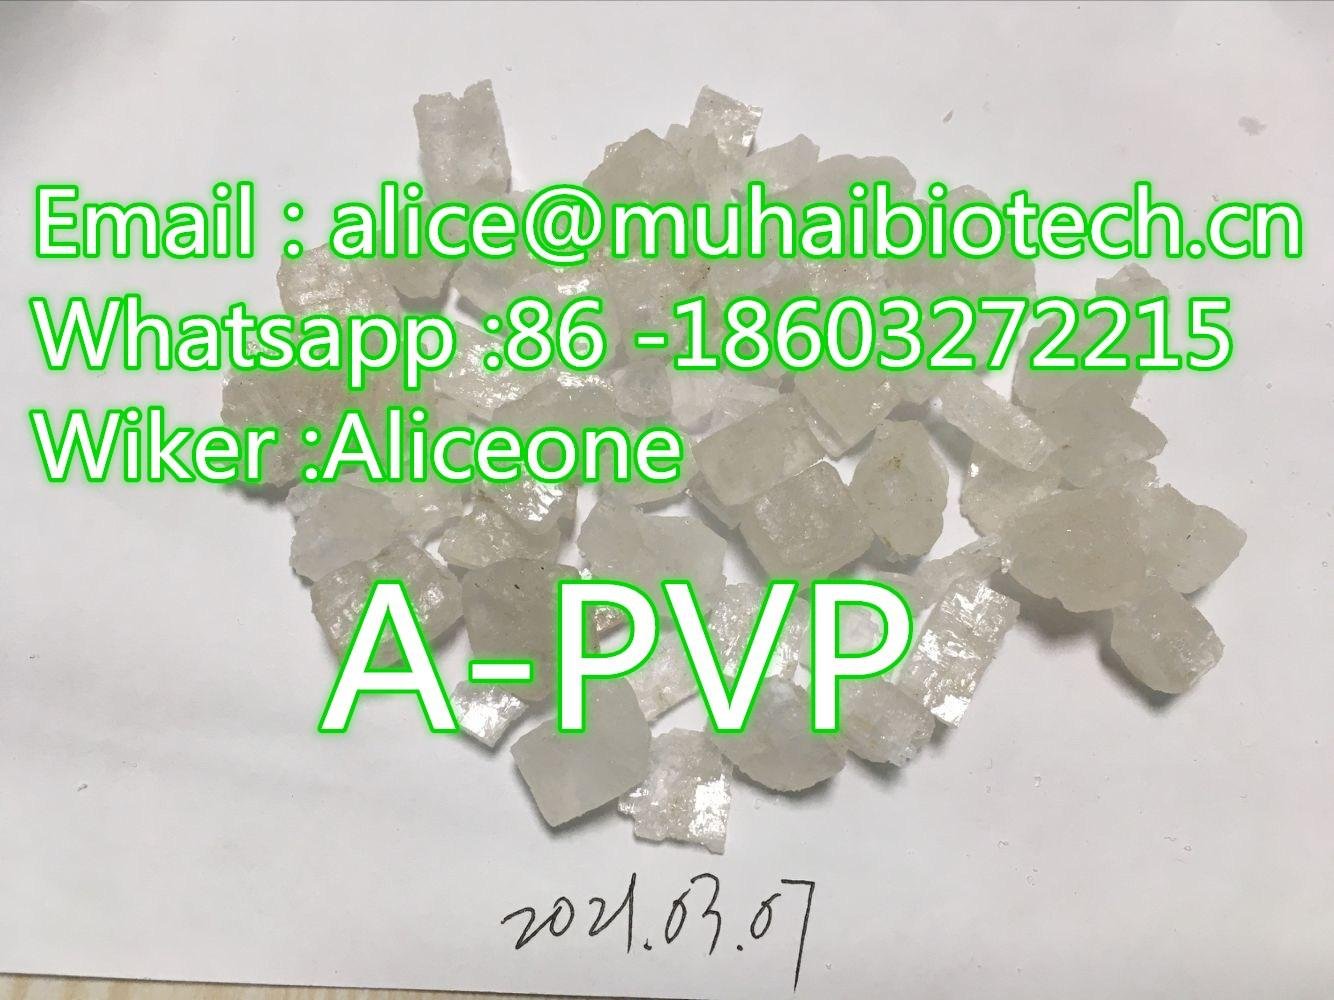 New batch Apvp a-pvp alpha-pvp alphapvp pvp PVP crystals in stock fast safe ship